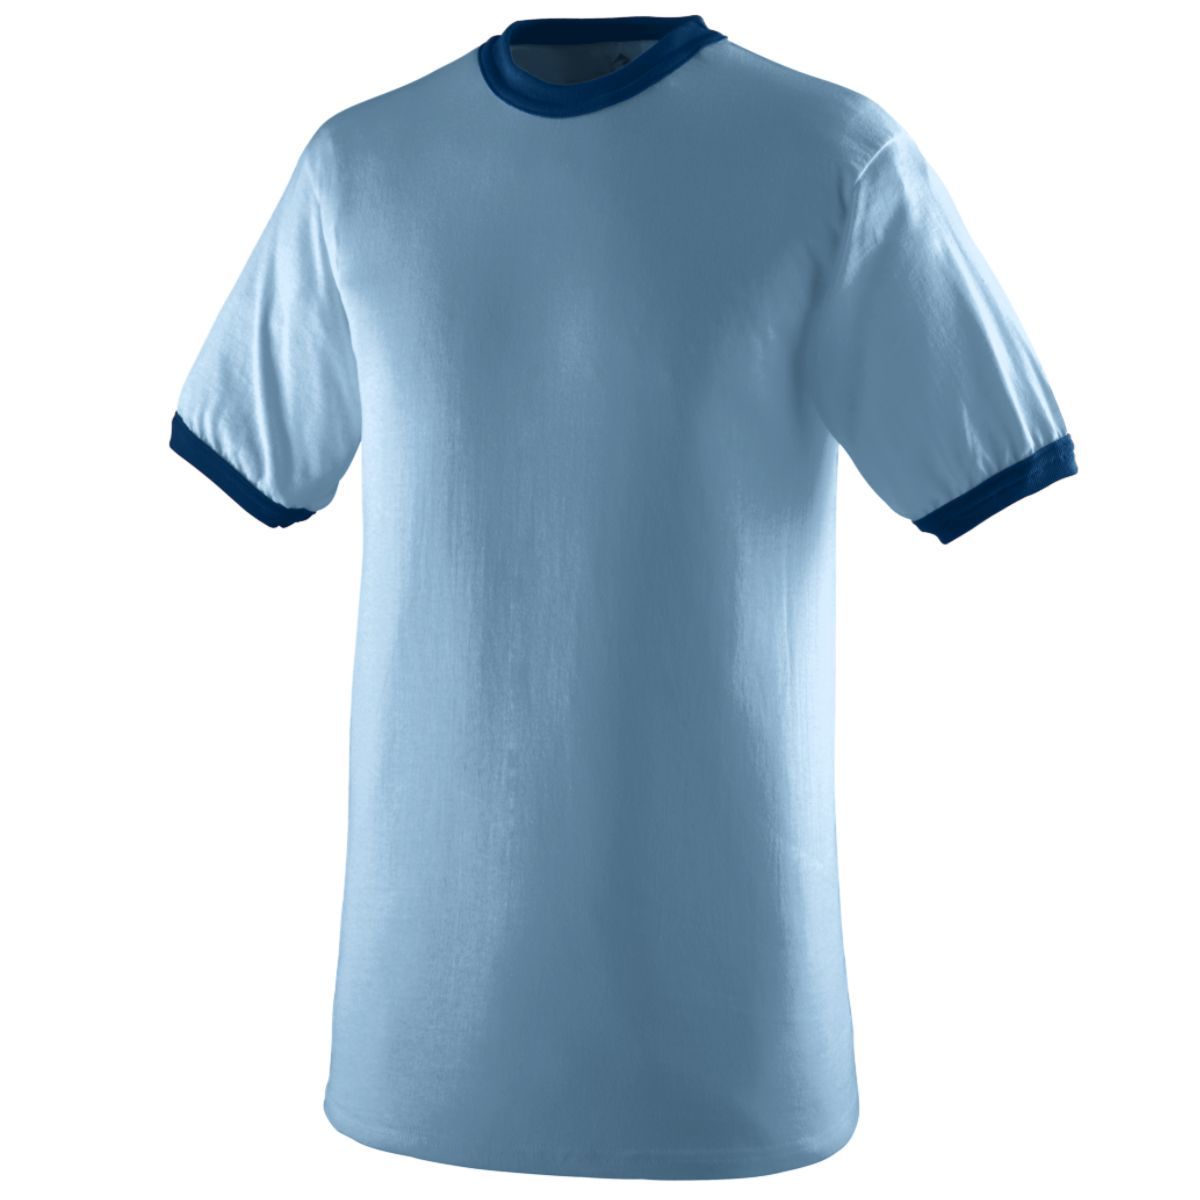 Augusta Sportswear Youth-Ringer T-Shirt in Light Blue/Navy  -Part of the Youth, Youth-Tee-Shirt, T-Shirts, Augusta-Products, Soccer, Shirts, All-Sports-1 product lines at KanaleyCreations.com